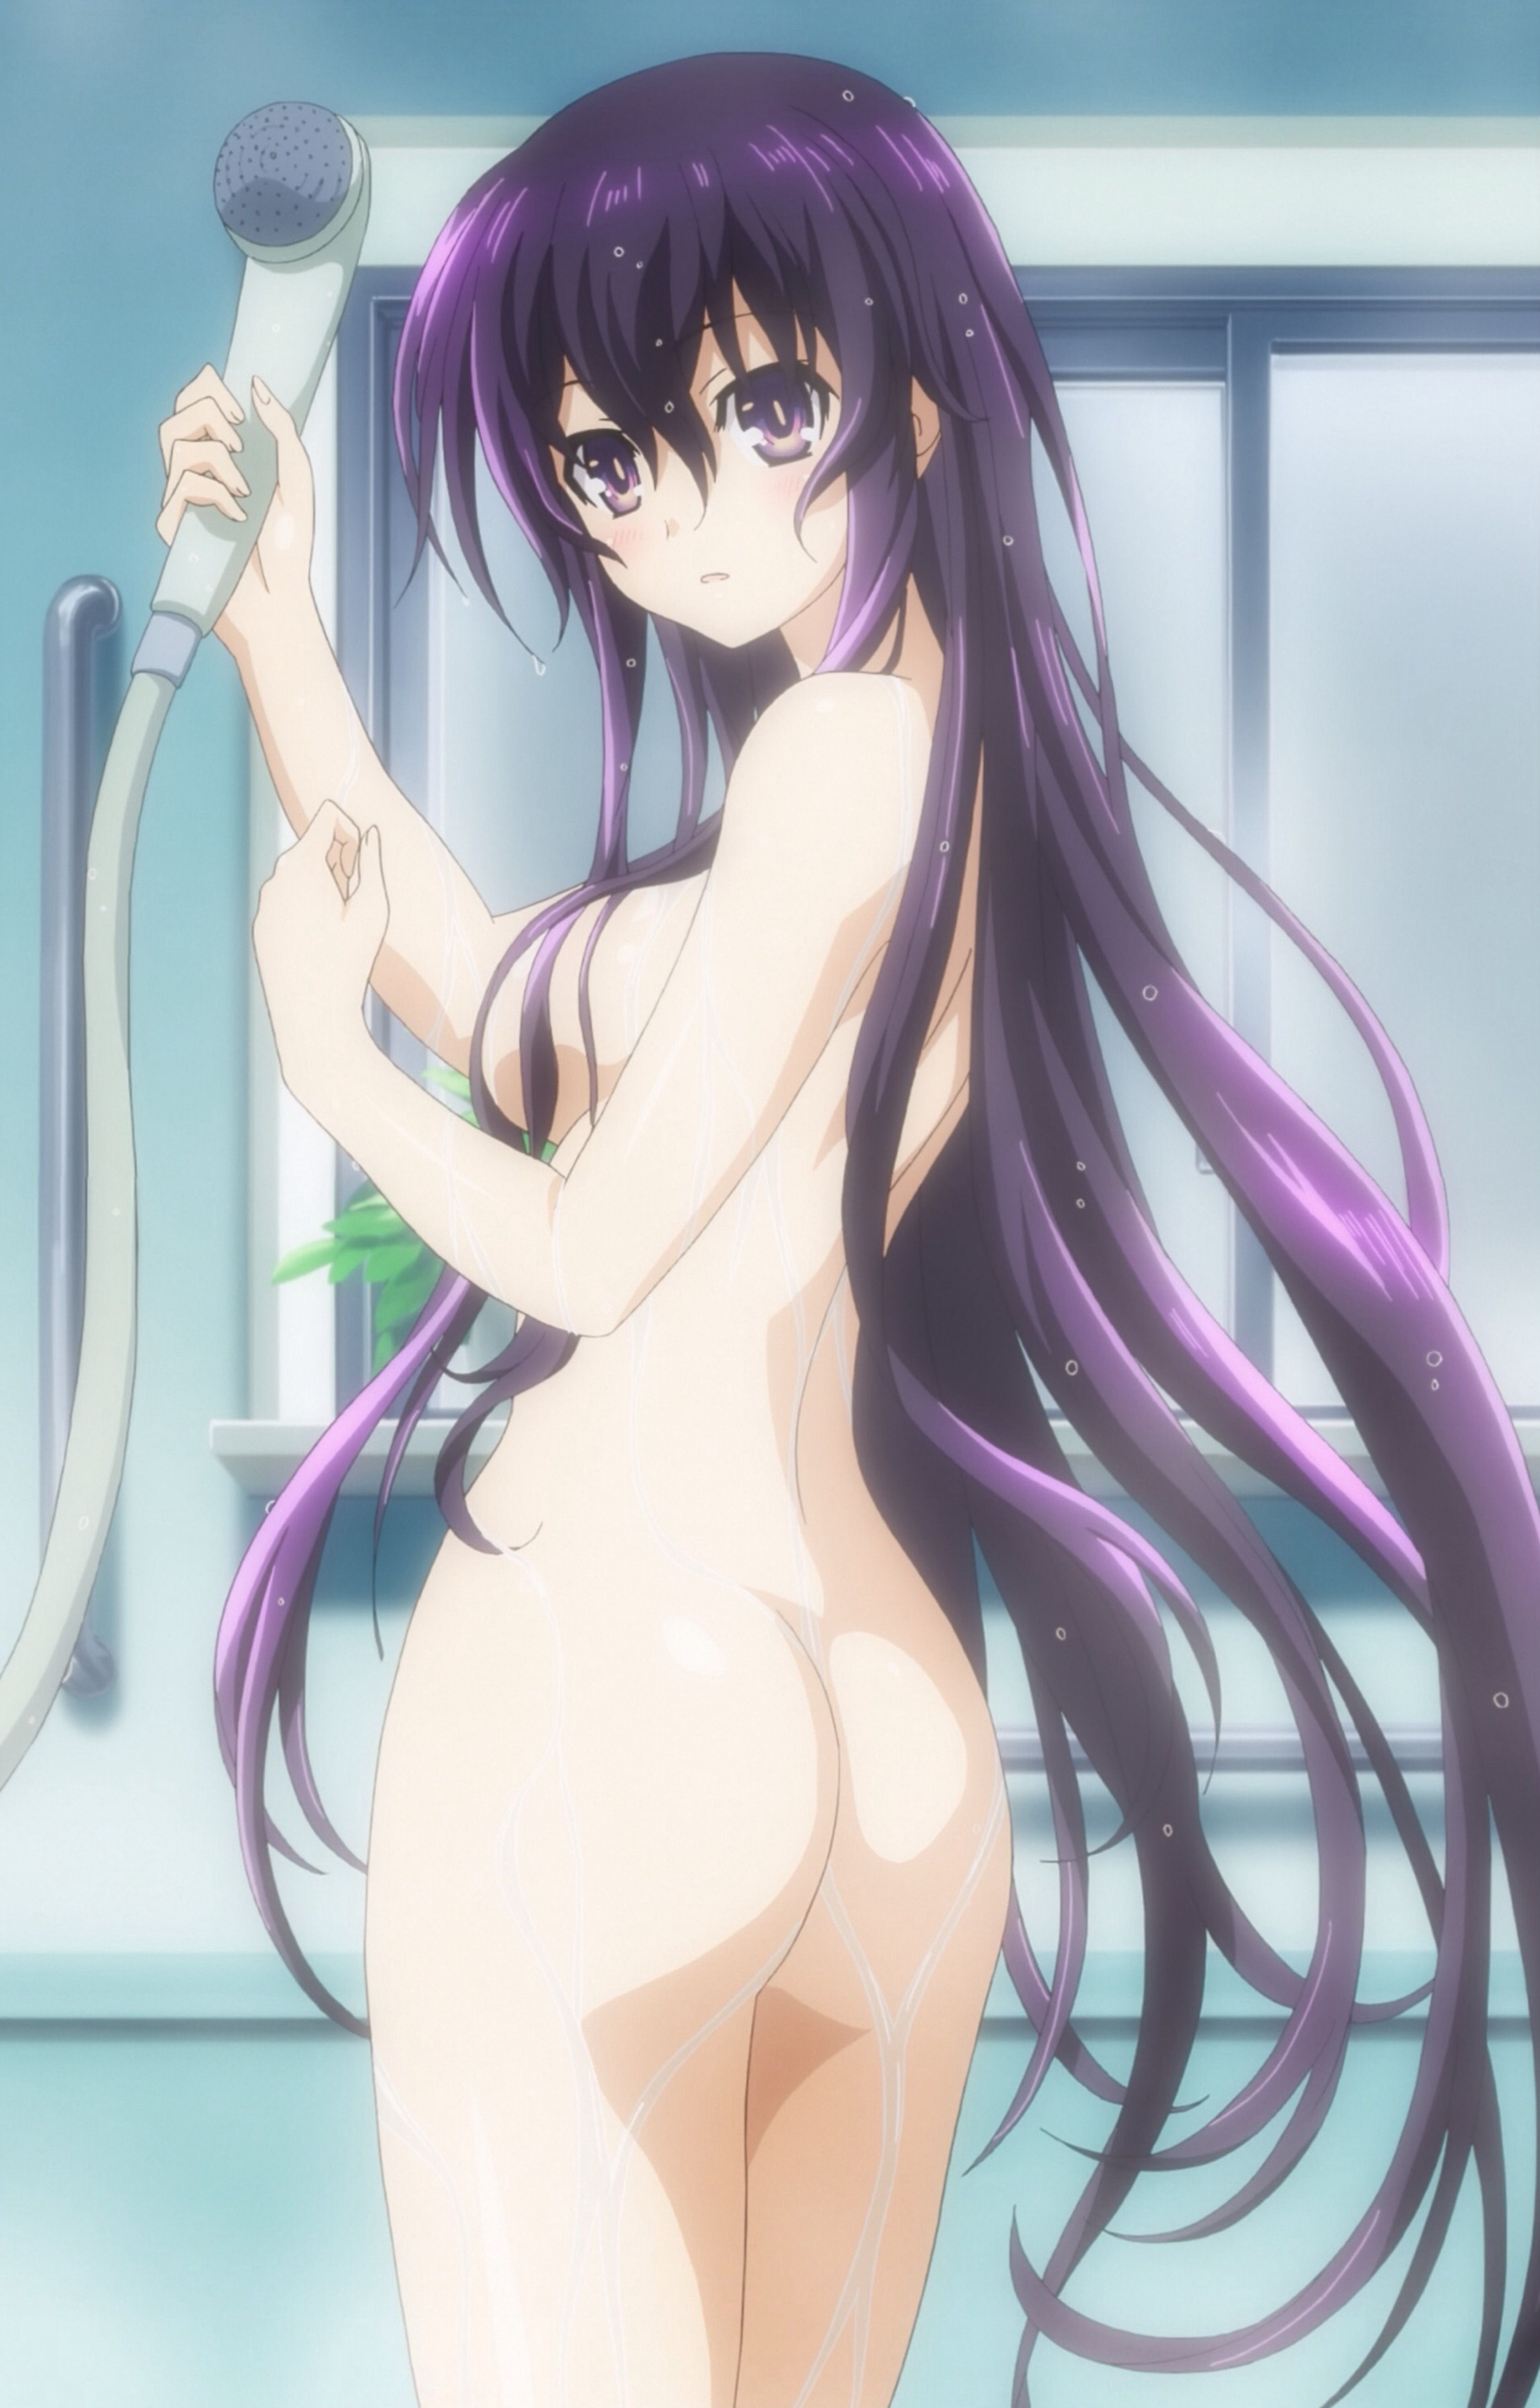 [Date a live] night sword God 10 incense (and chills) Photo Gallery wwww 17